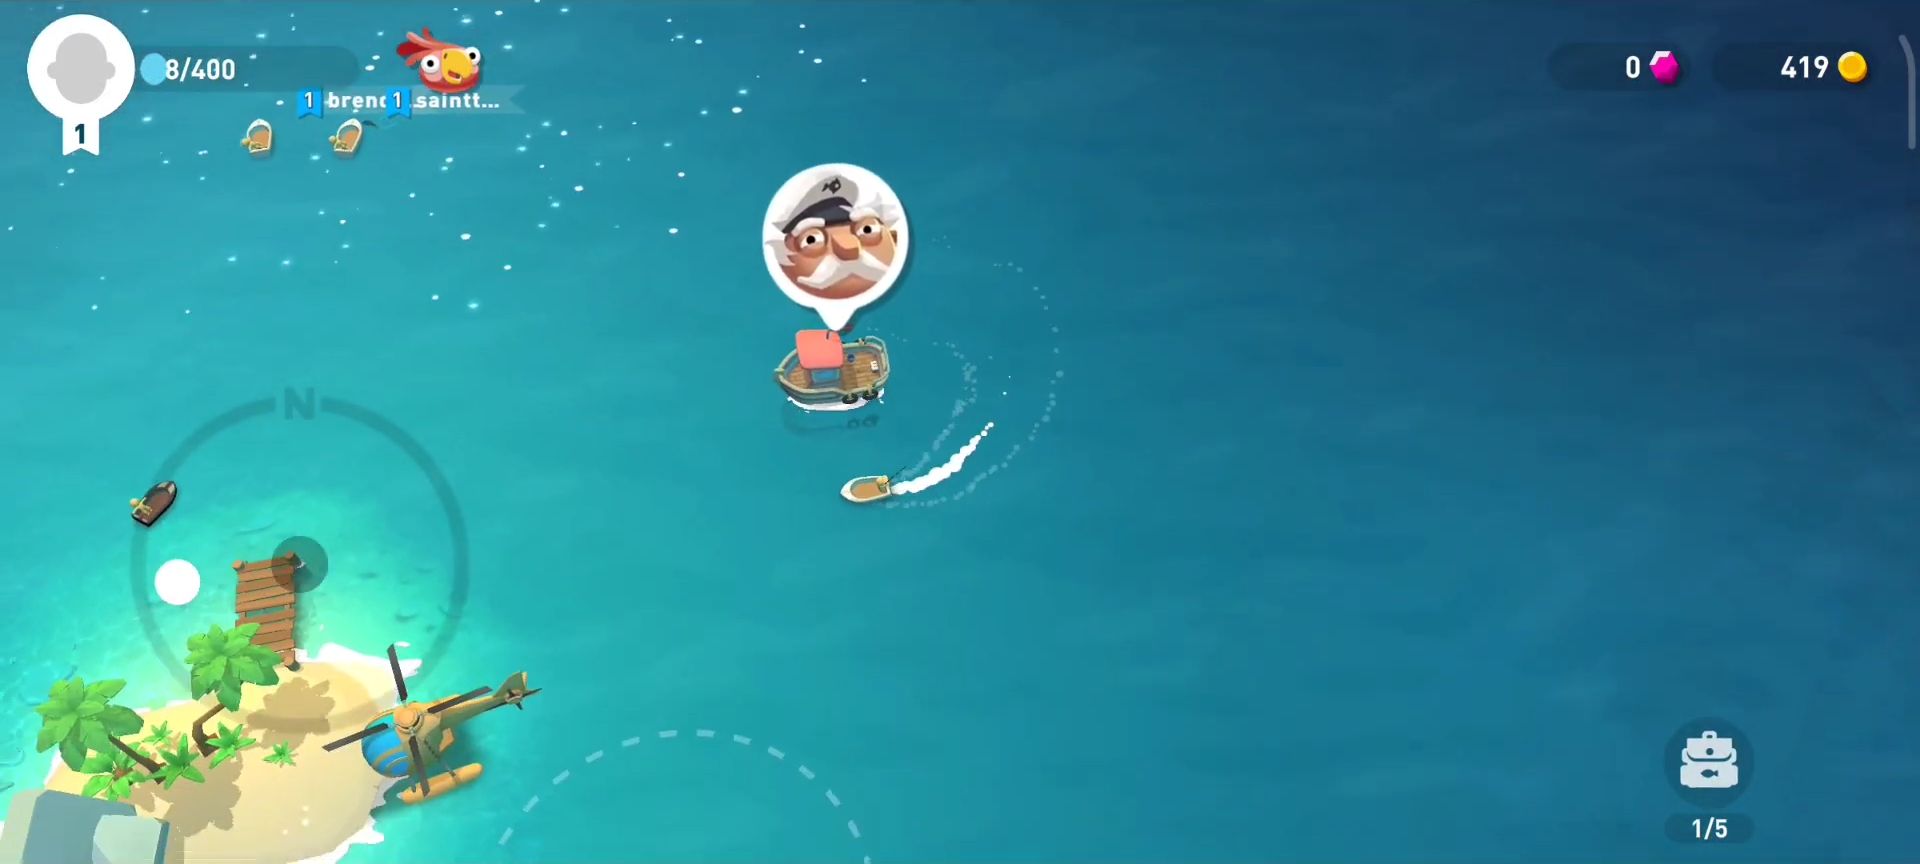 Gameplay of the Creatures of the Deep: Fishing for Android phone or tablet.